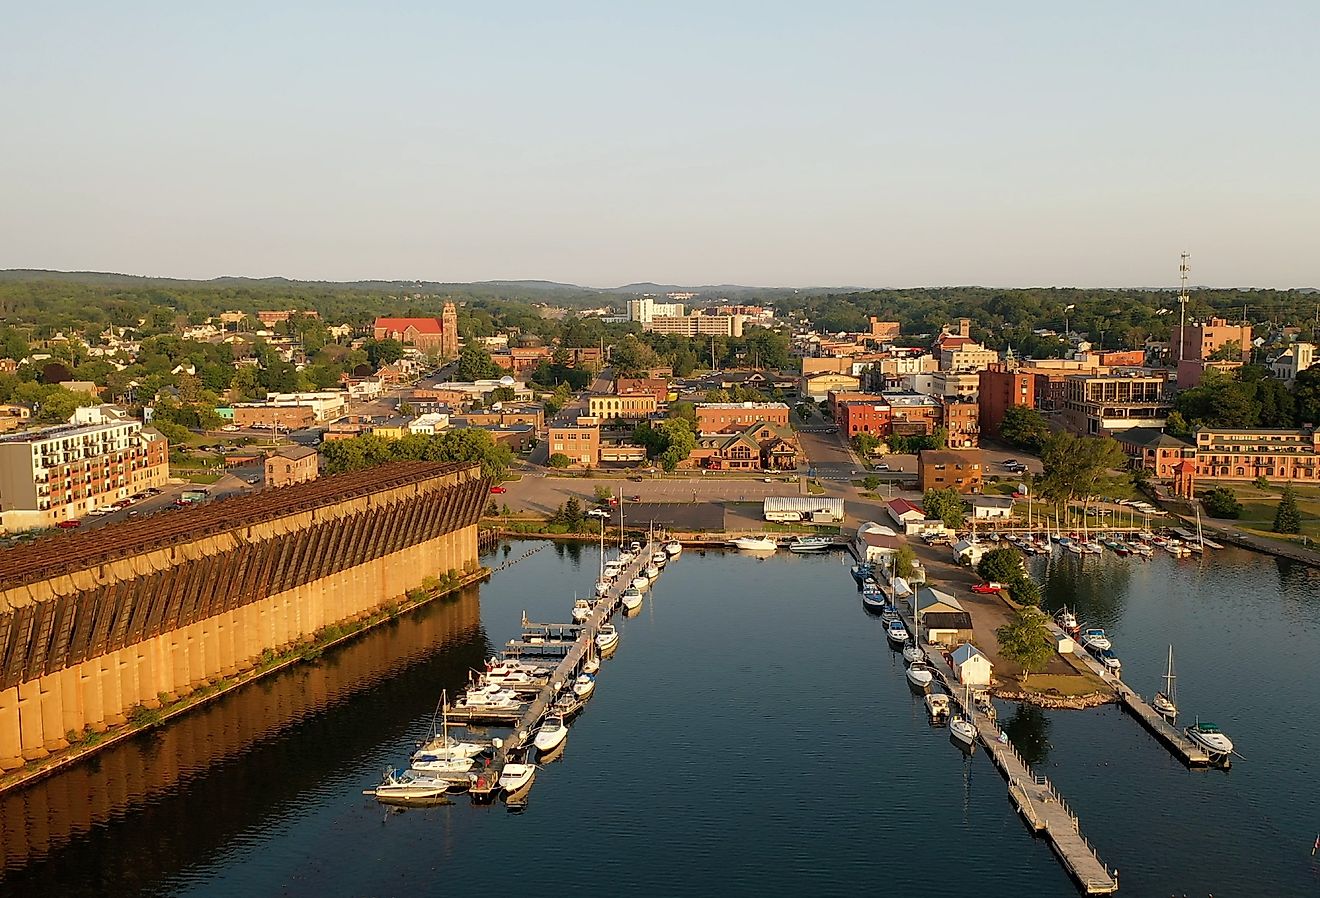 View of cityscape of Marquette, Michigan from Lake Superior.